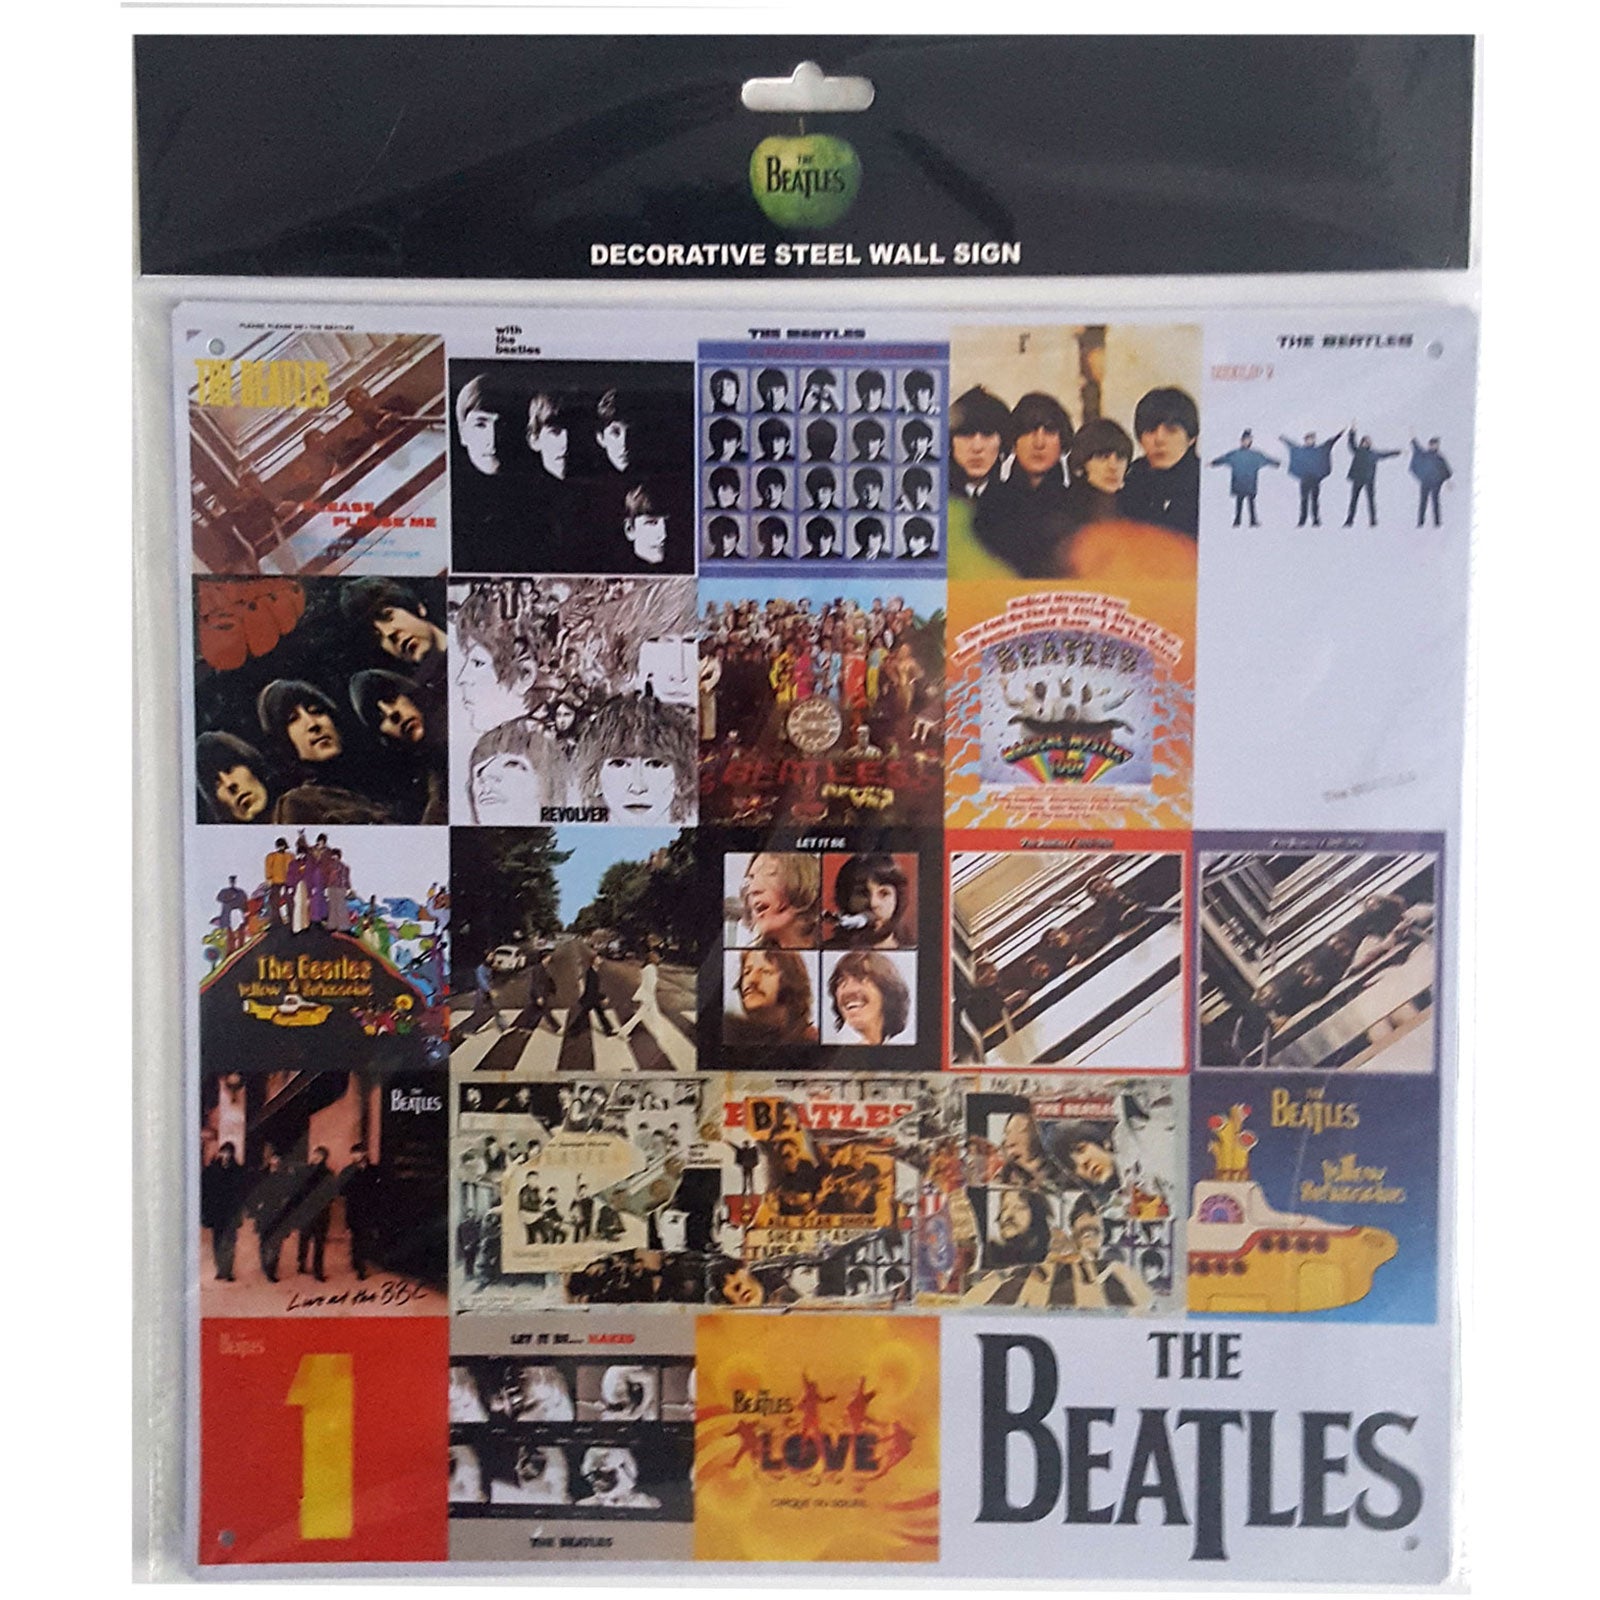 The Beatles Steel Wall Sign: Chronology